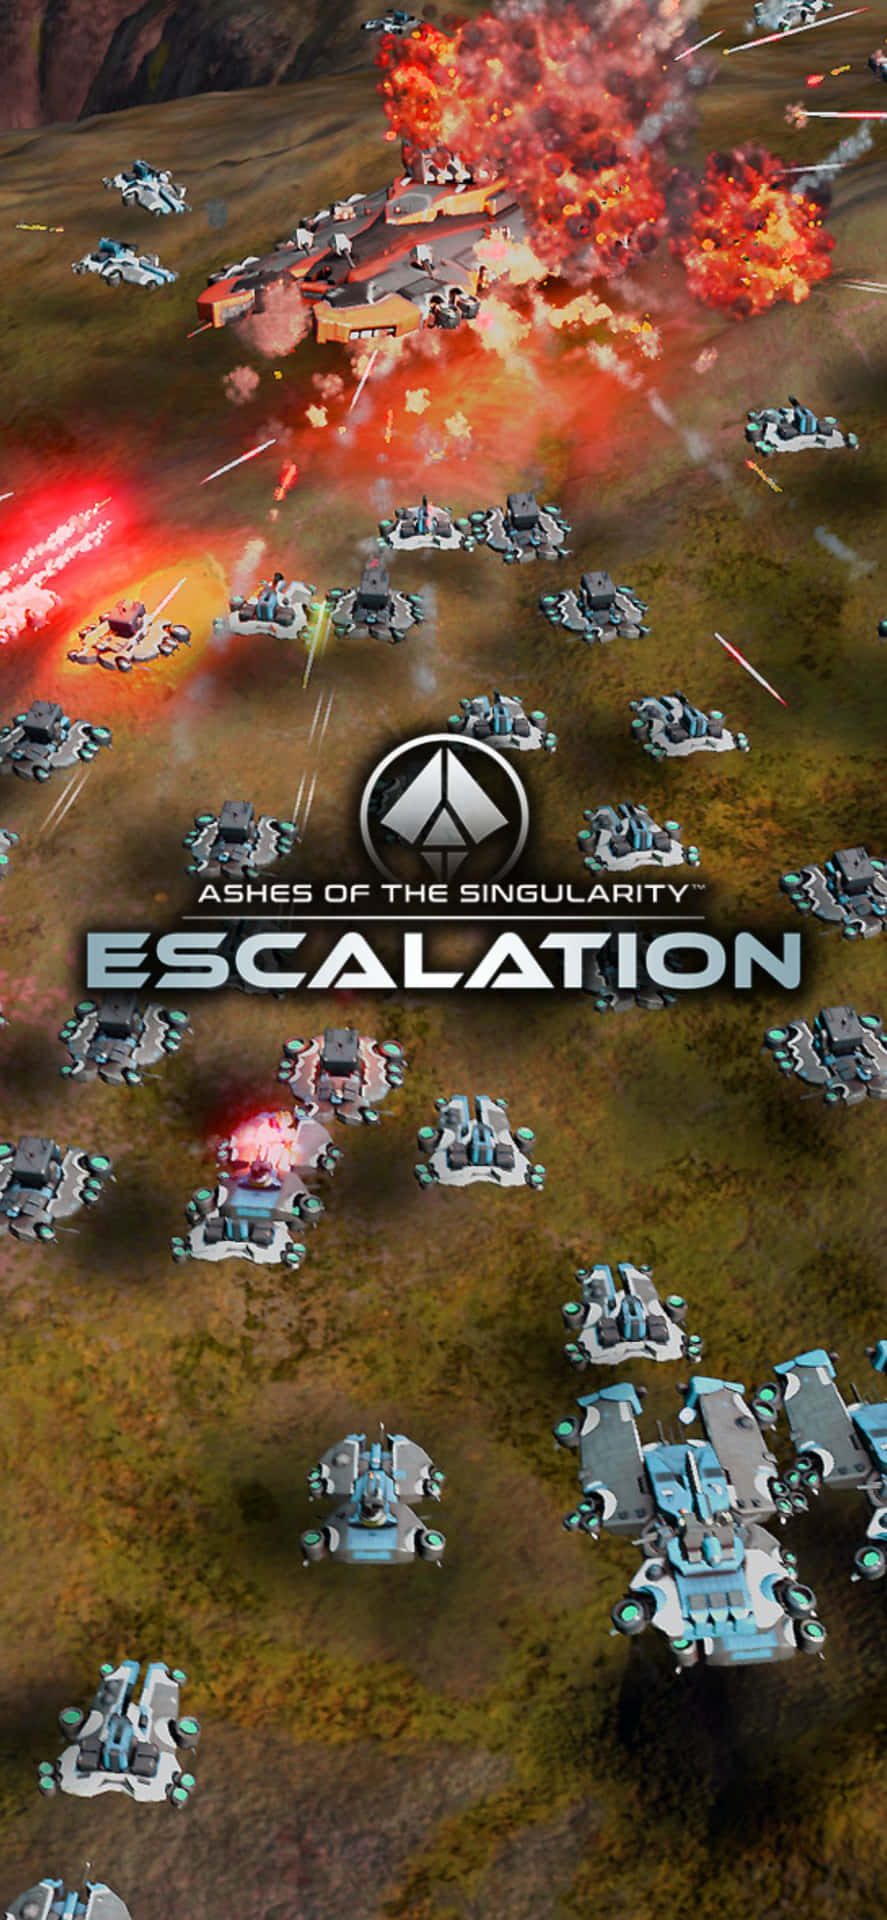 Experience Ashes Of The Singularity Escalation on the Iphone X